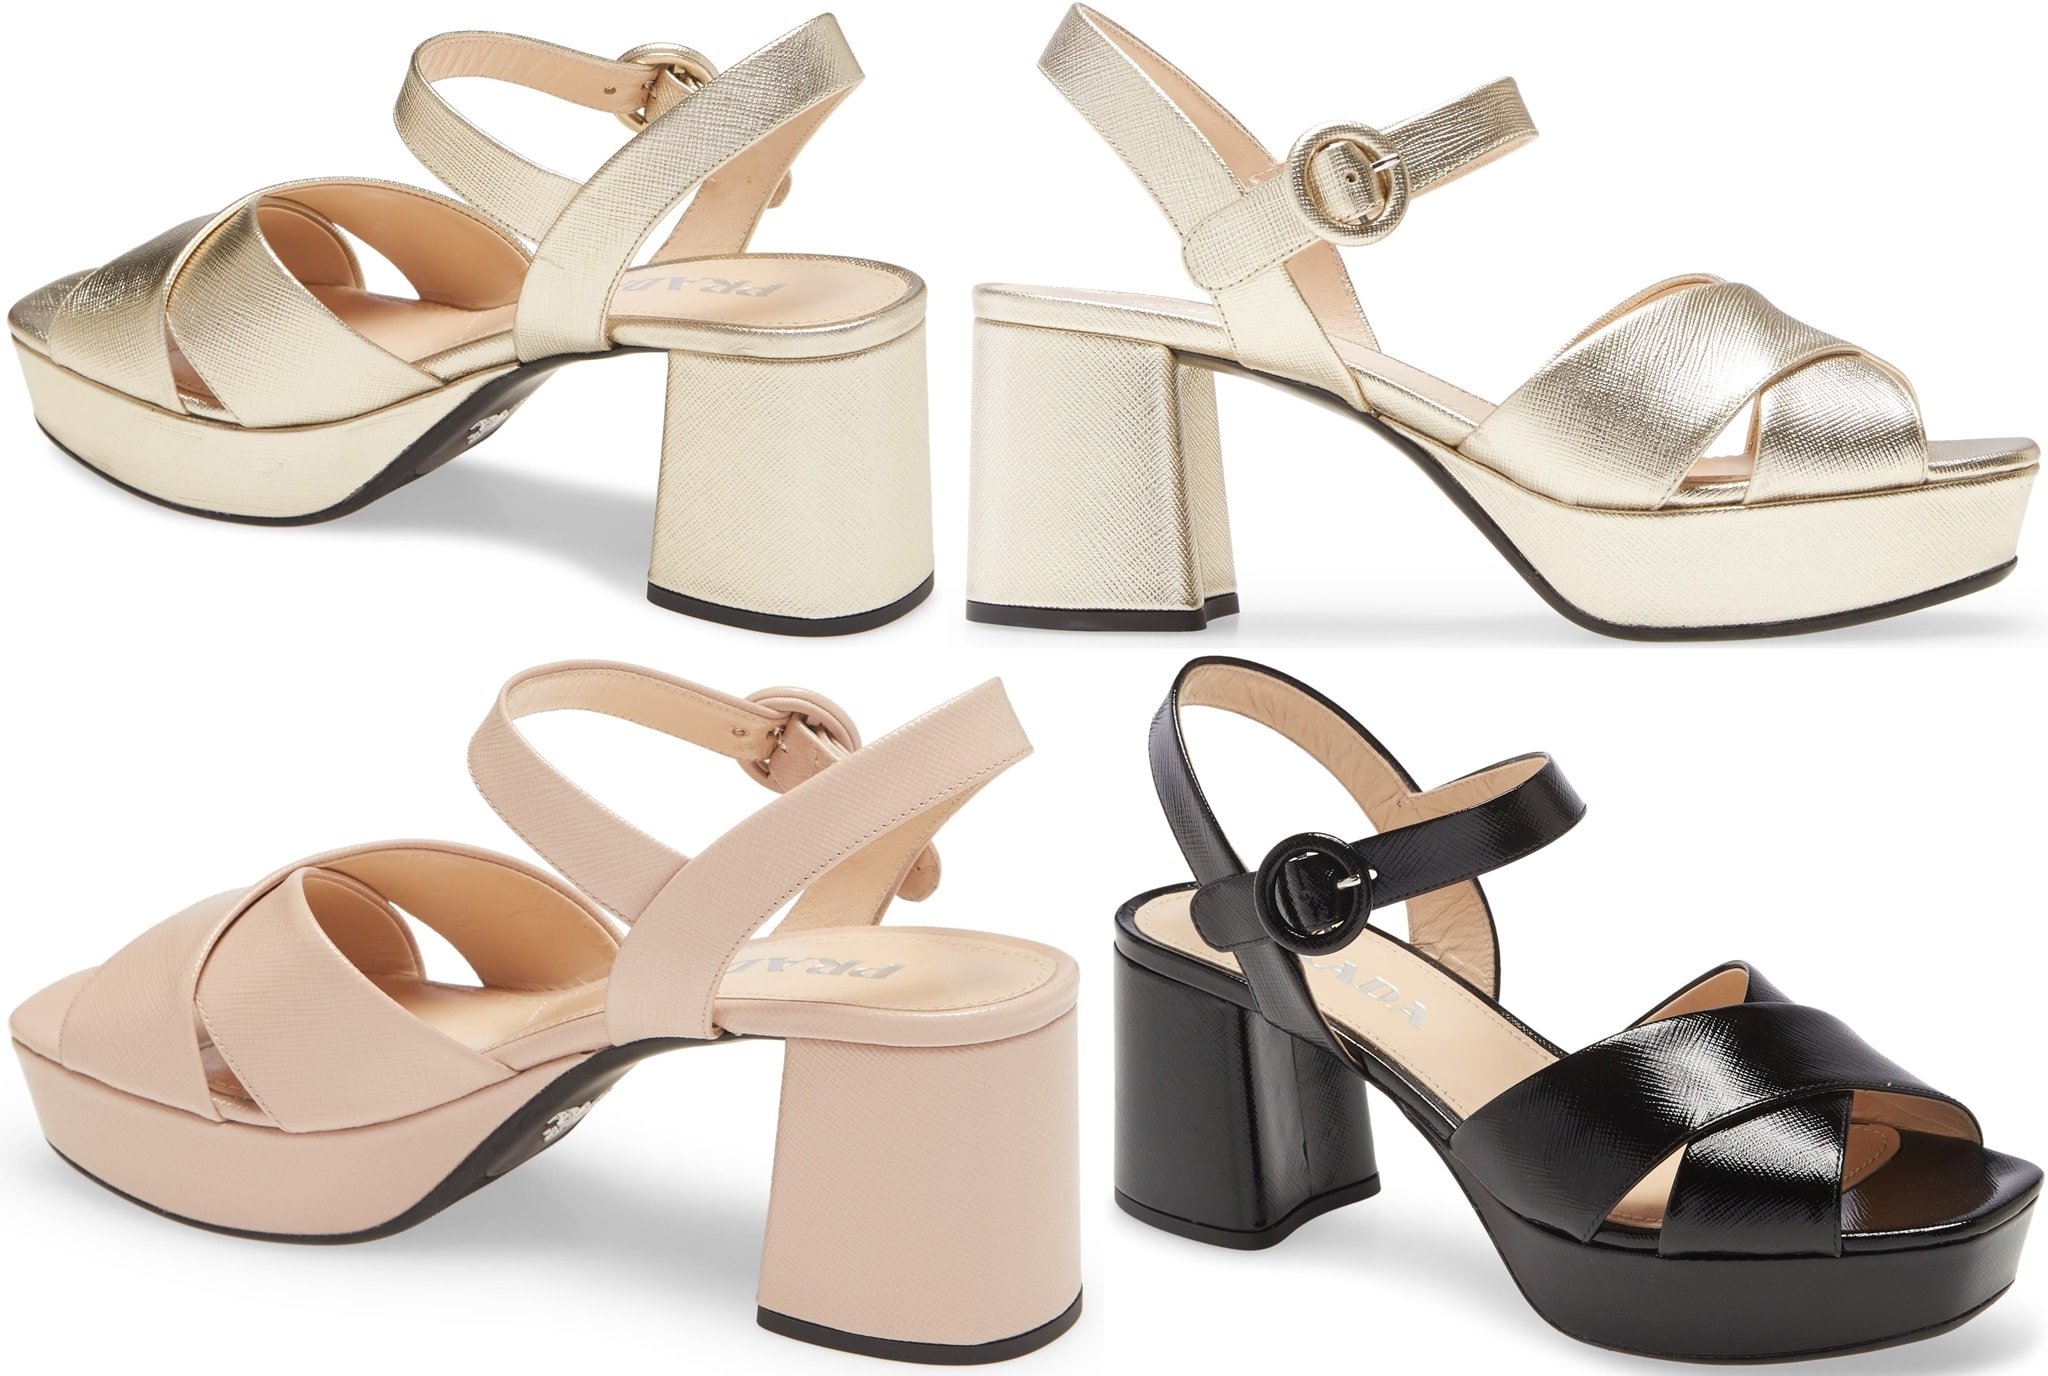 Wide crisscross straps at the vamp perfectly balance the chunky heel of this Saffiano-leather sandal with a wrapped platform and buckle for a sleek, tonal look